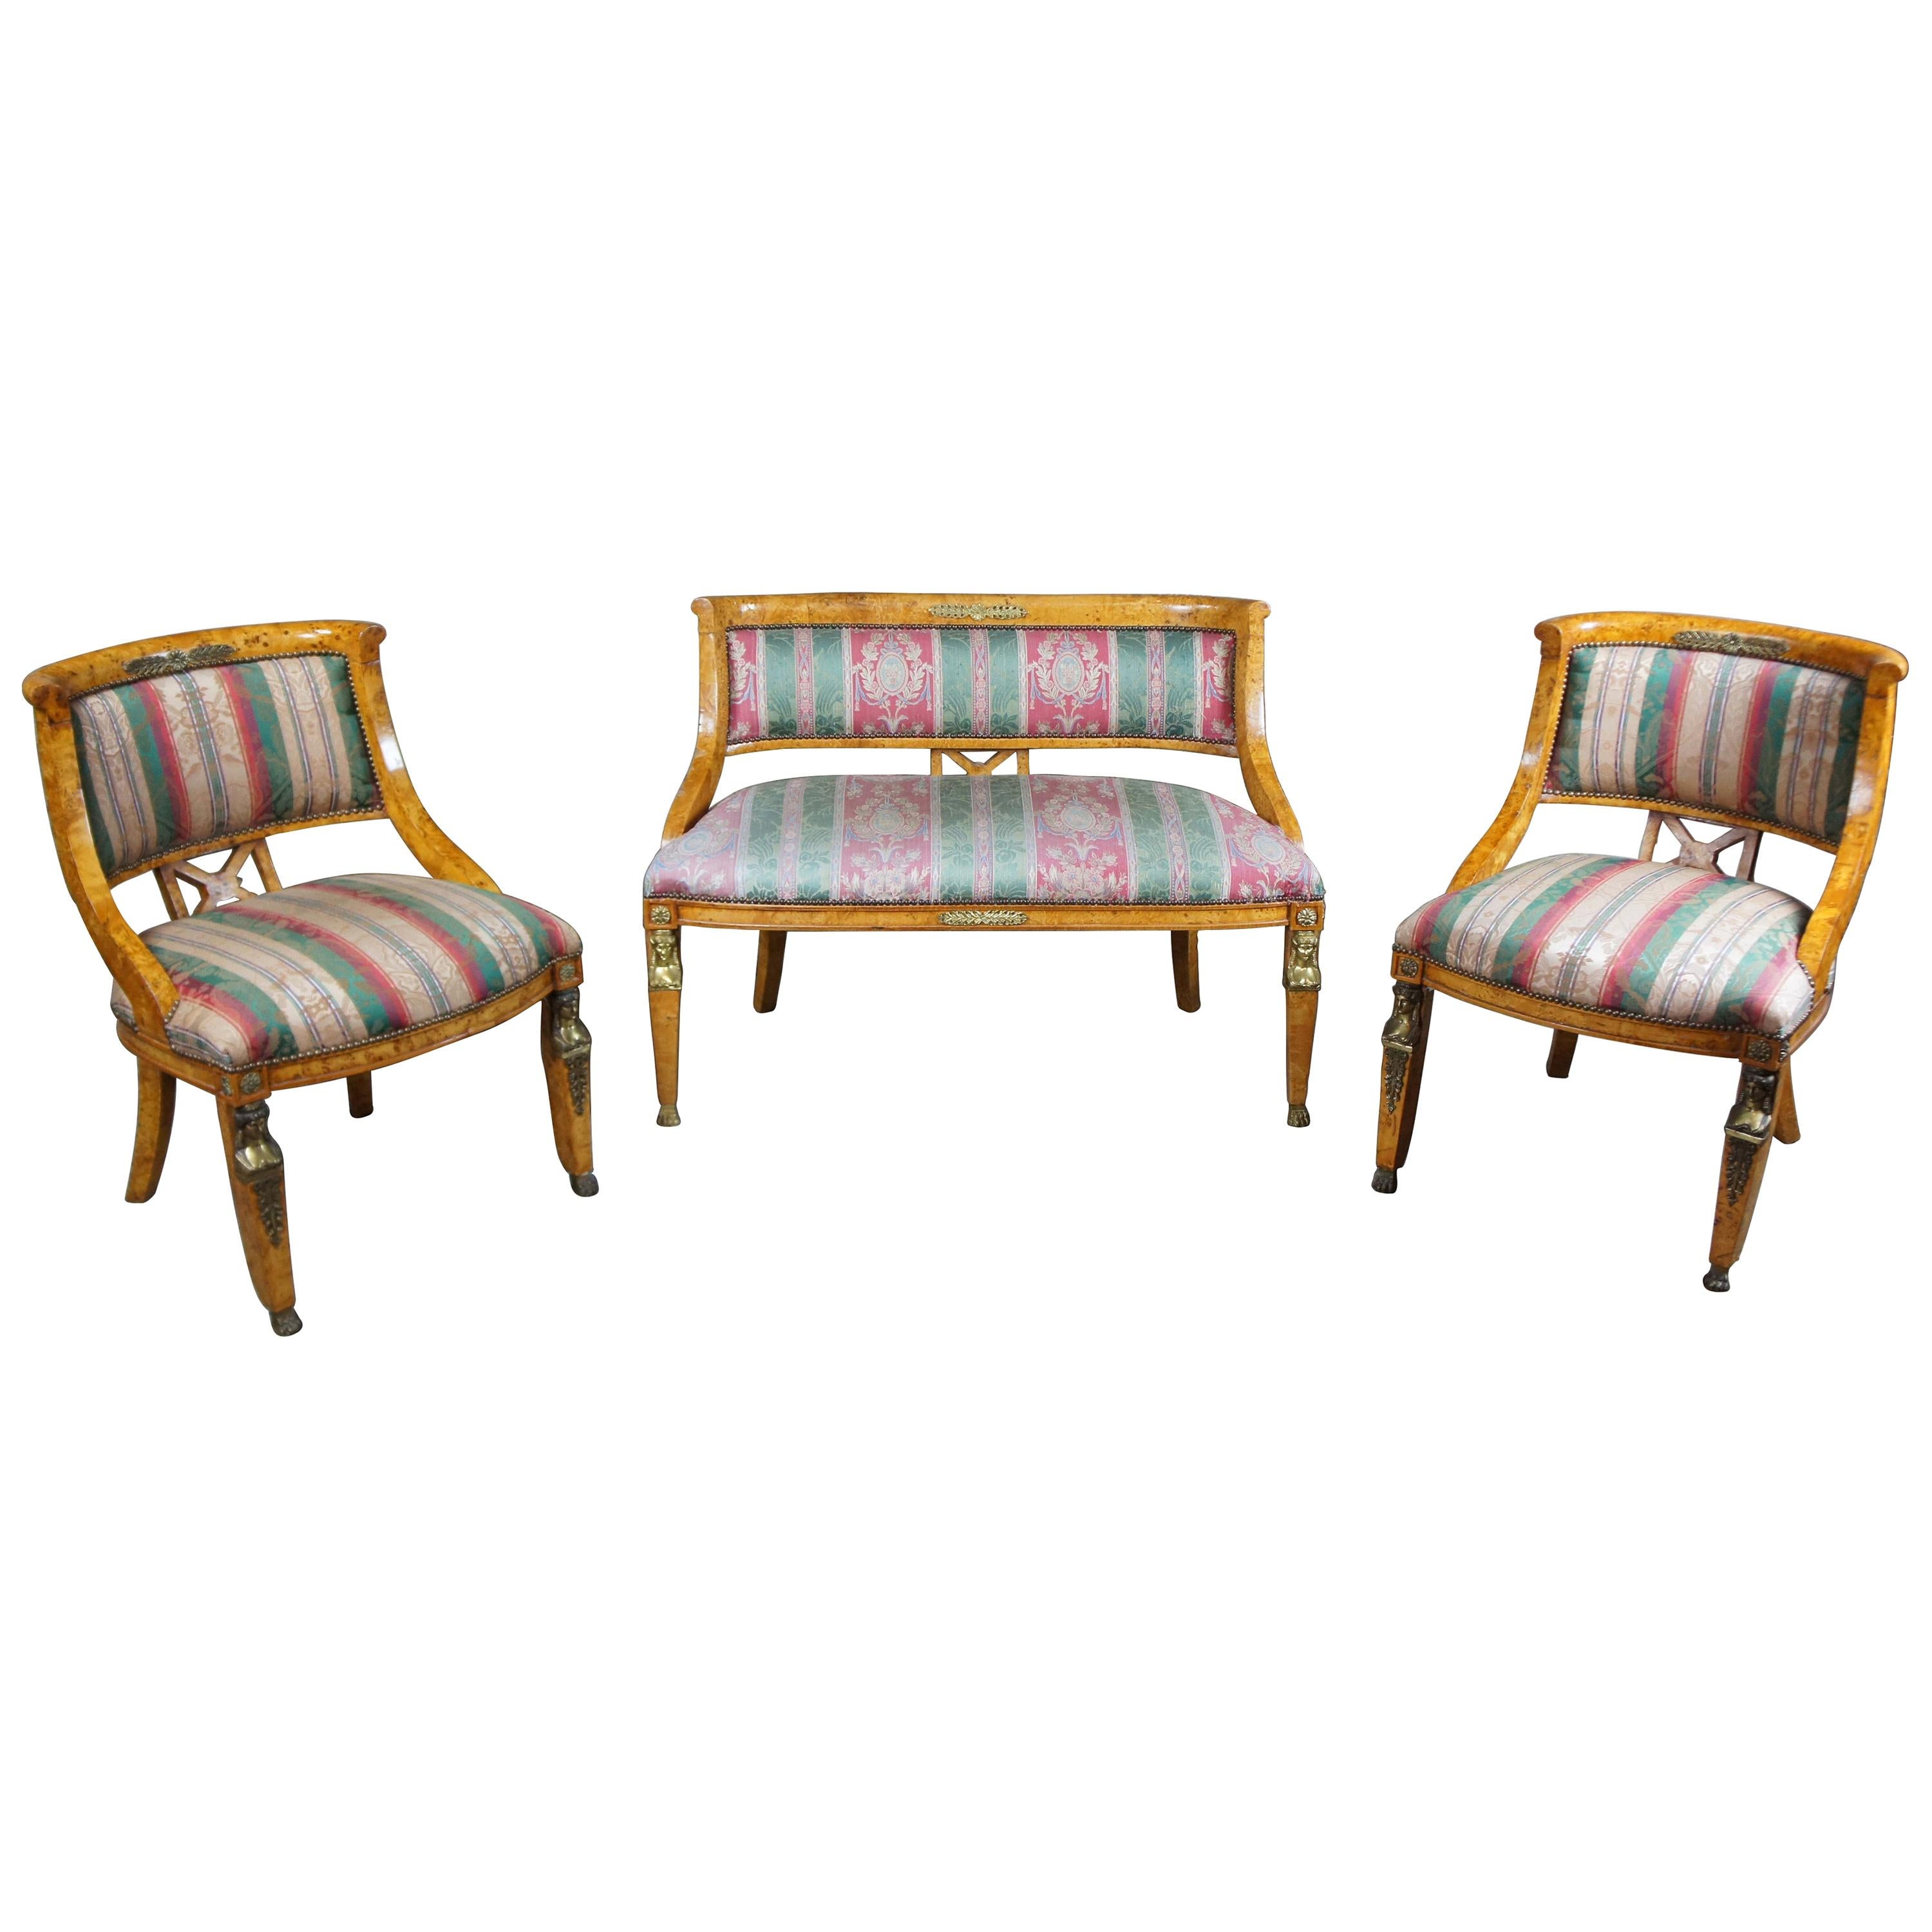 Antique Egyptian Revival Olive Burlwood Parlor Set Chairs Settee Neoclassical